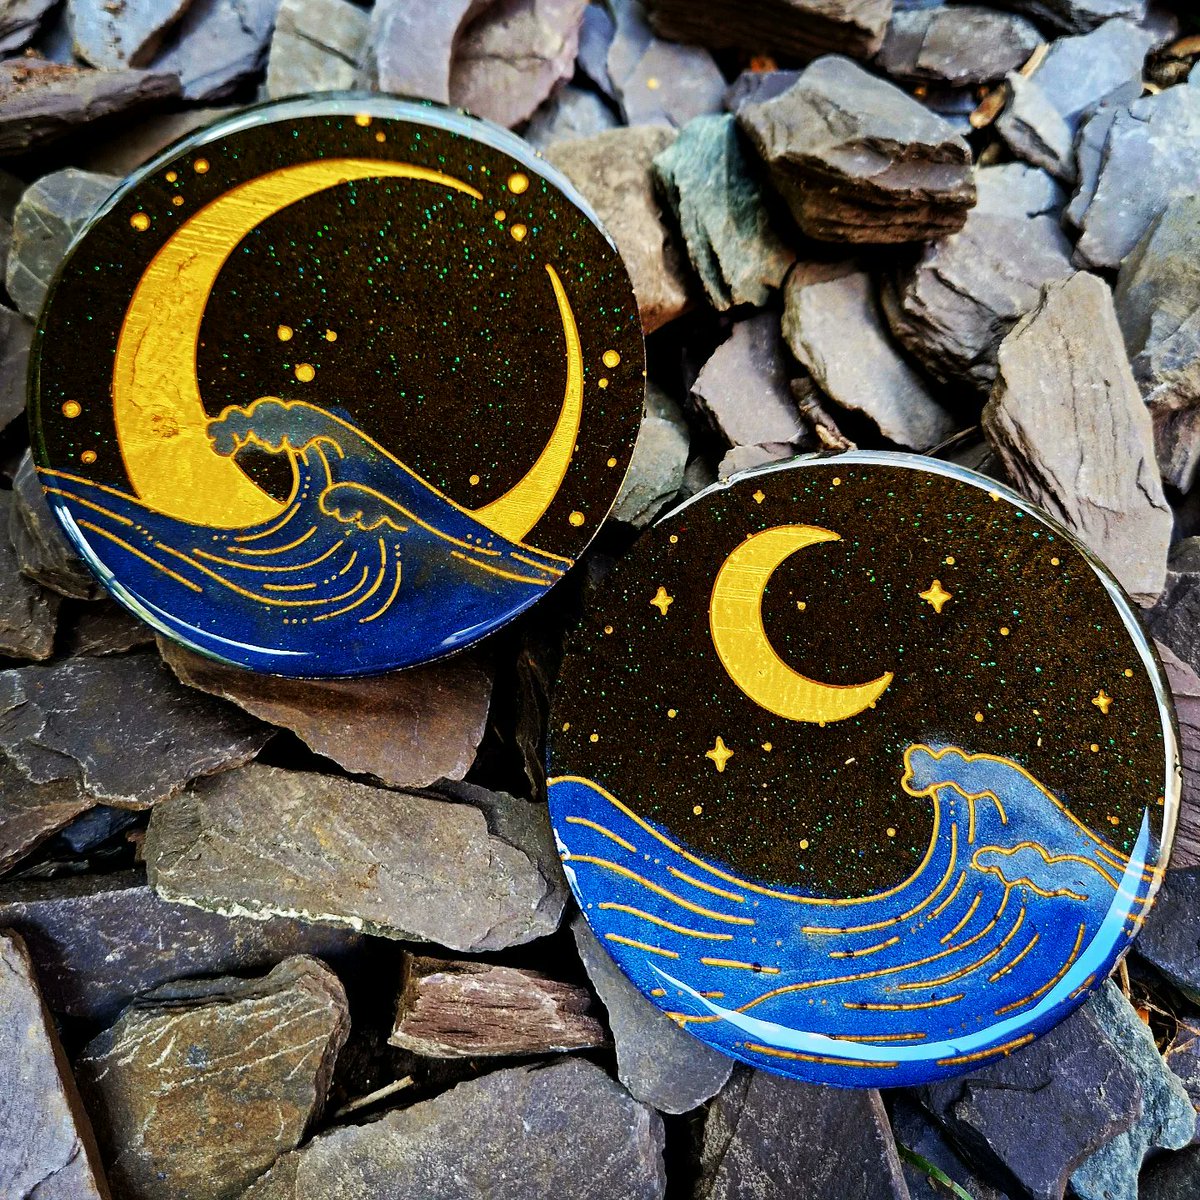 Golden moon coaster sets are now available. I am still waiting on that first order for these ✨️🌙
#EarlyBiz
etsy.com/listing/149474…